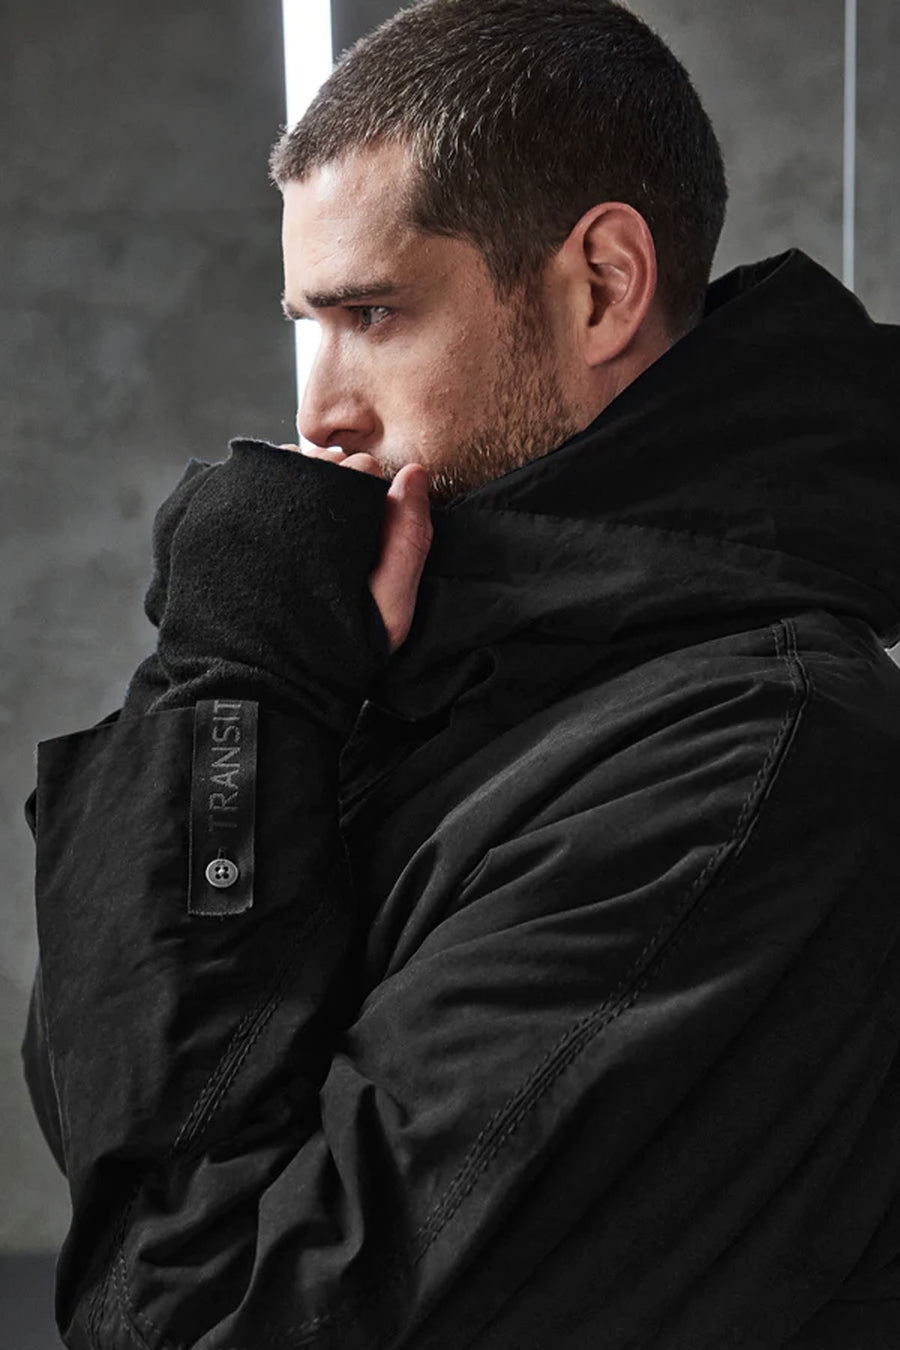 Buy the Transit Reversible Oversize Duck Down Jacket in Black at Intro. Spend £50 for free UK delivery. Official stockists. We ship worldwide.